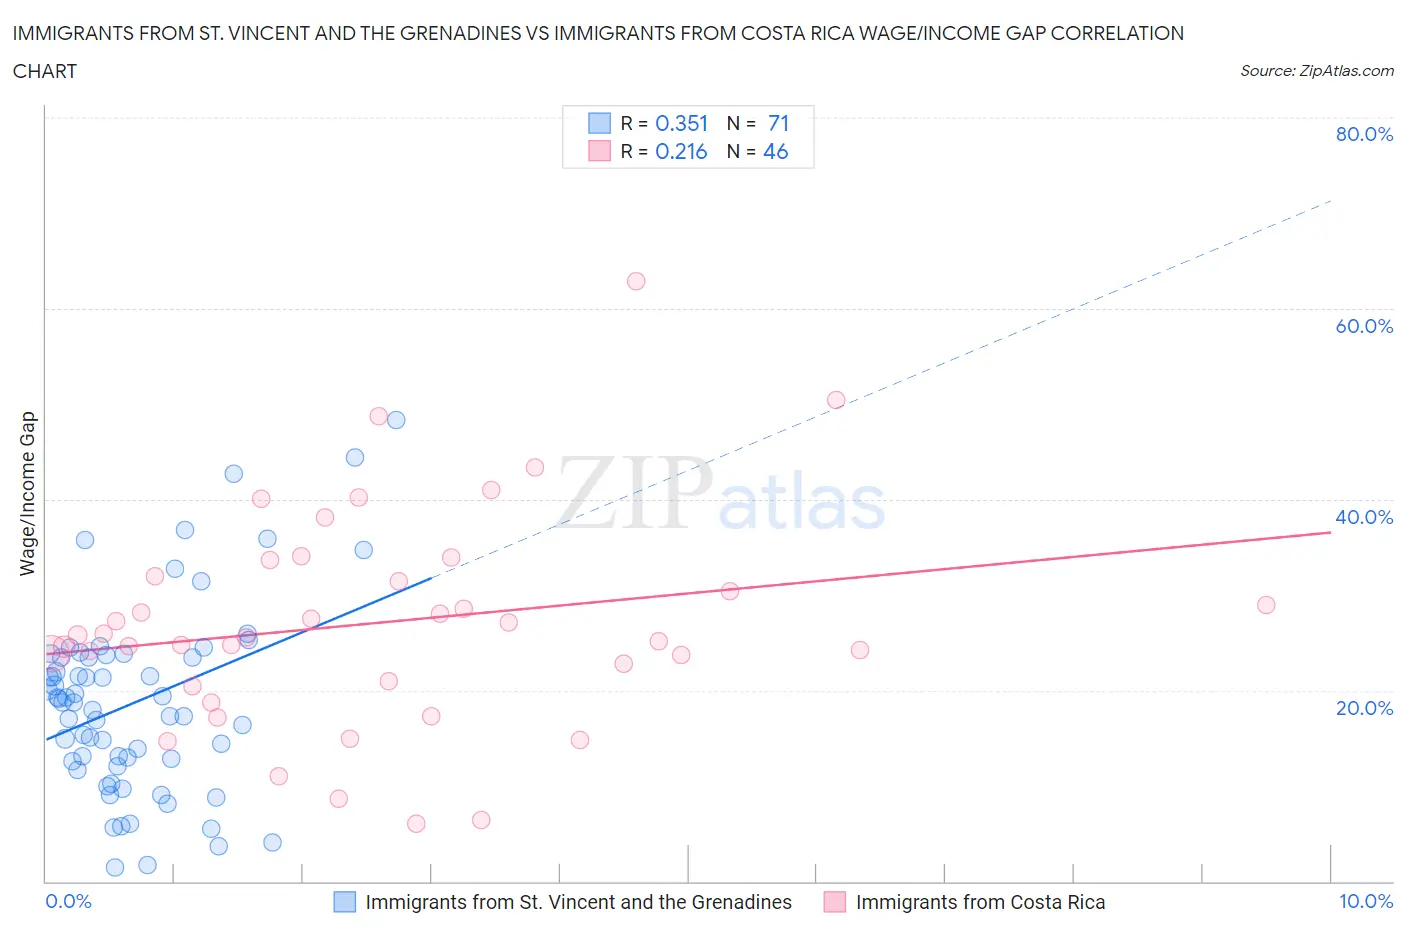 Immigrants from St. Vincent and the Grenadines vs Immigrants from Costa Rica Wage/Income Gap